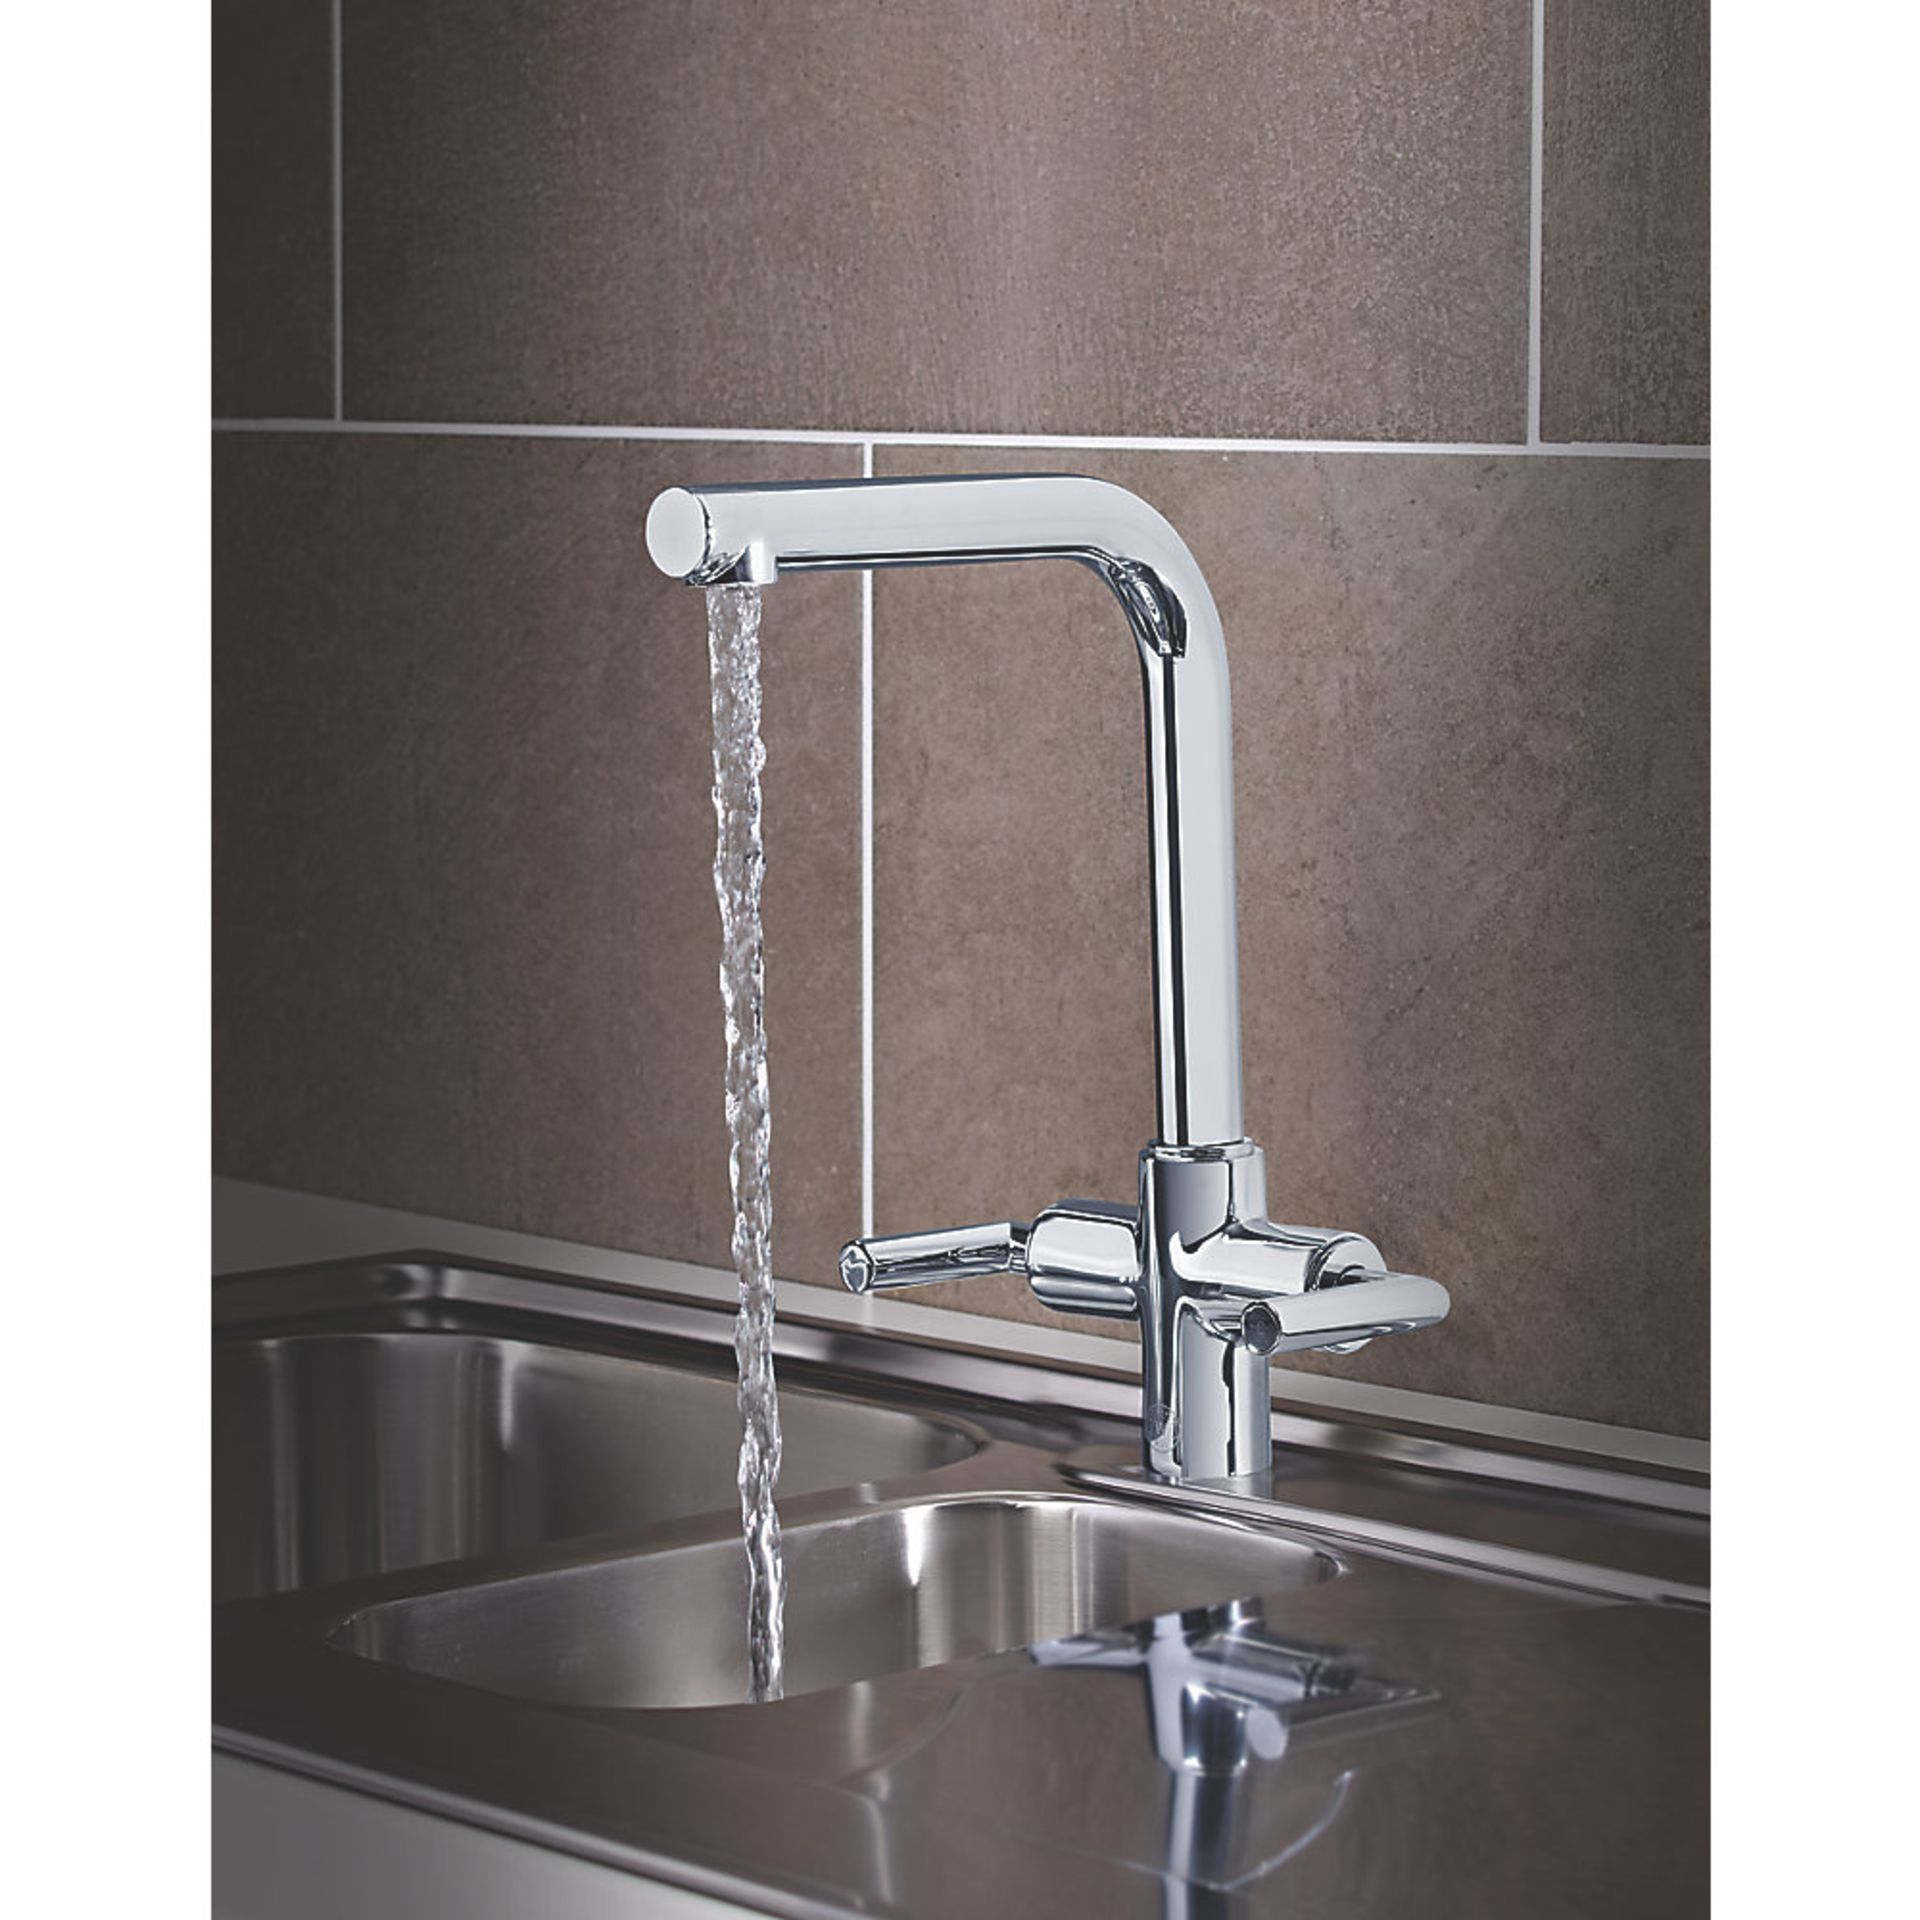 (XX70) Heritage Dolce Dual-Lever Mixer Tap Chrome. Double Lever Operation _ Turn Deck-Mounte...